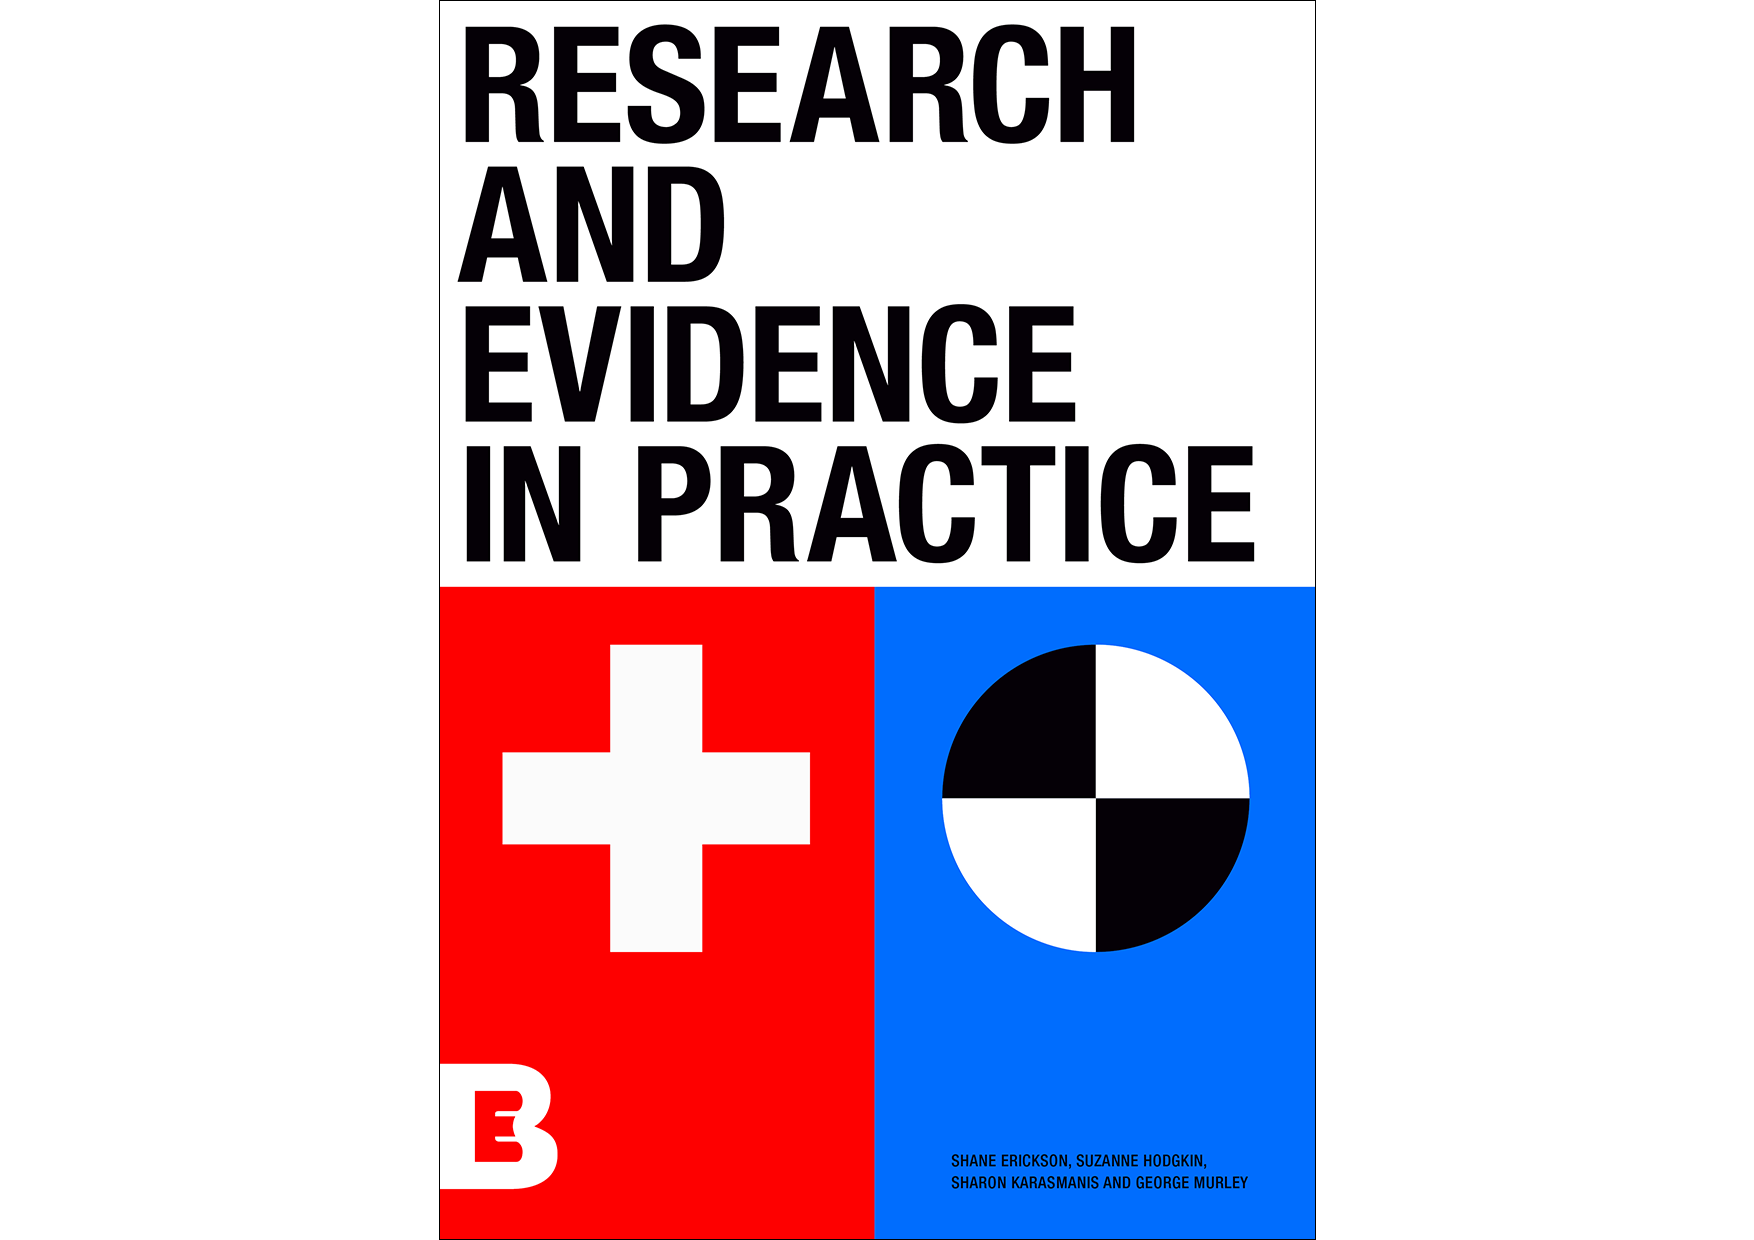 Research and evidence in practice